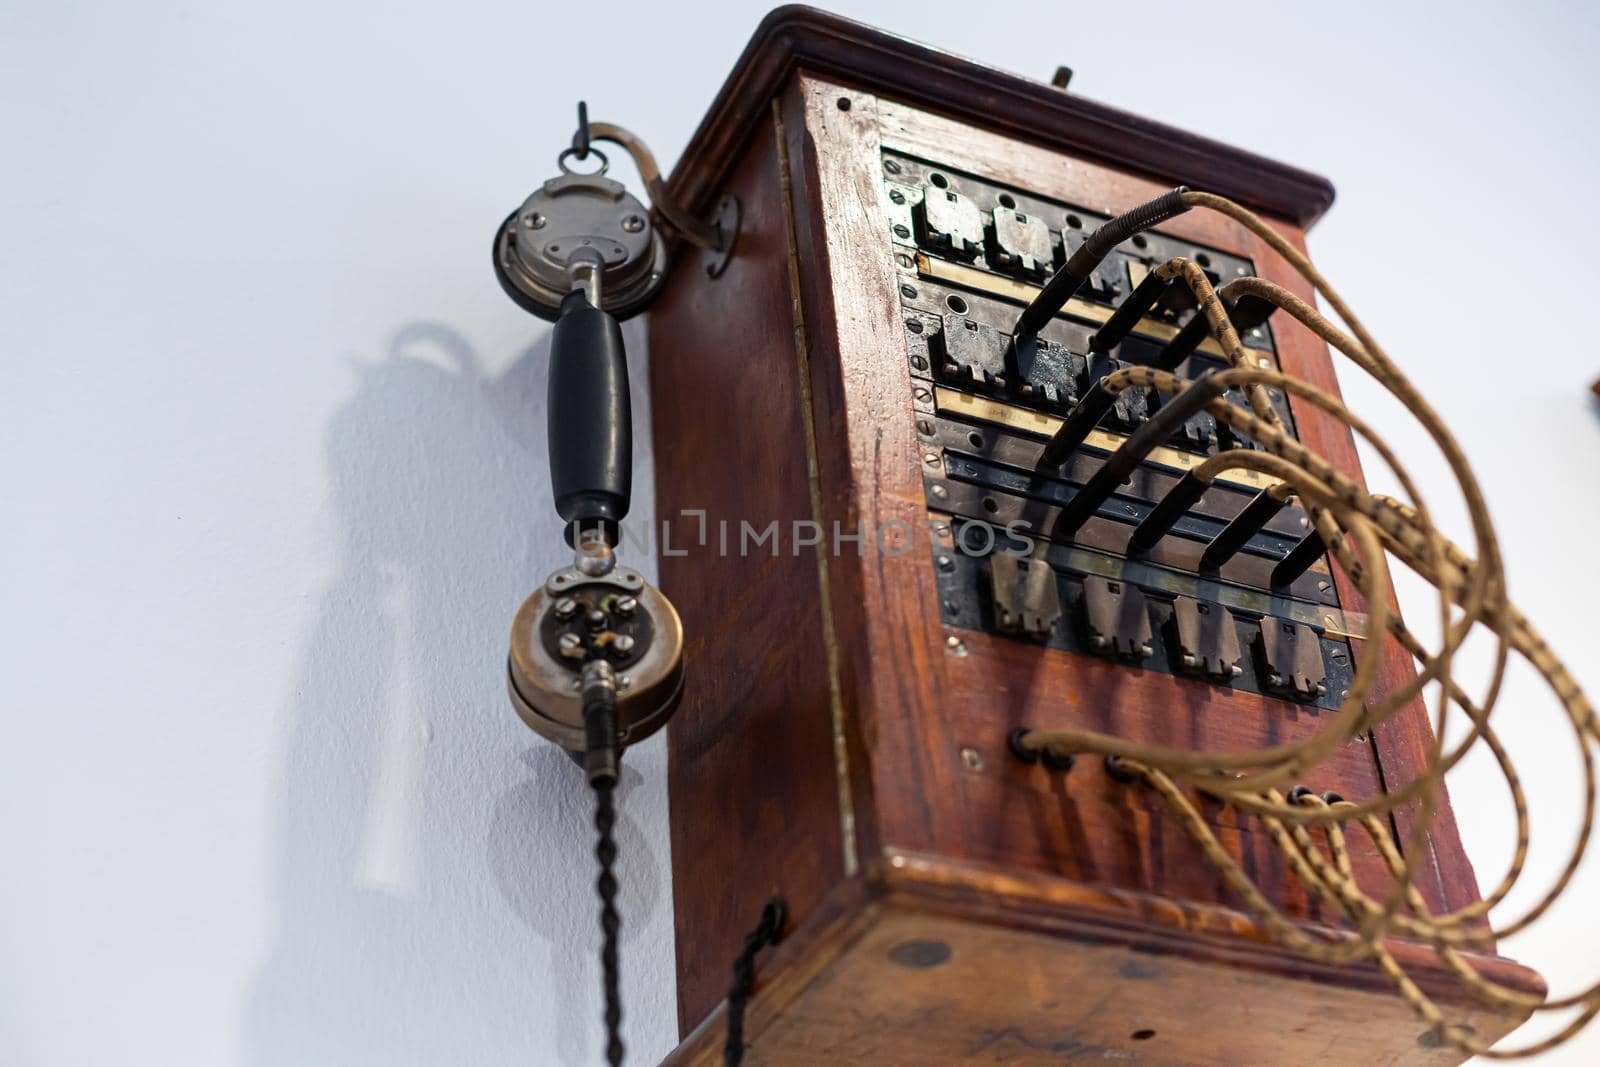 Details of the antique telephone set made of wood by Try_my_best